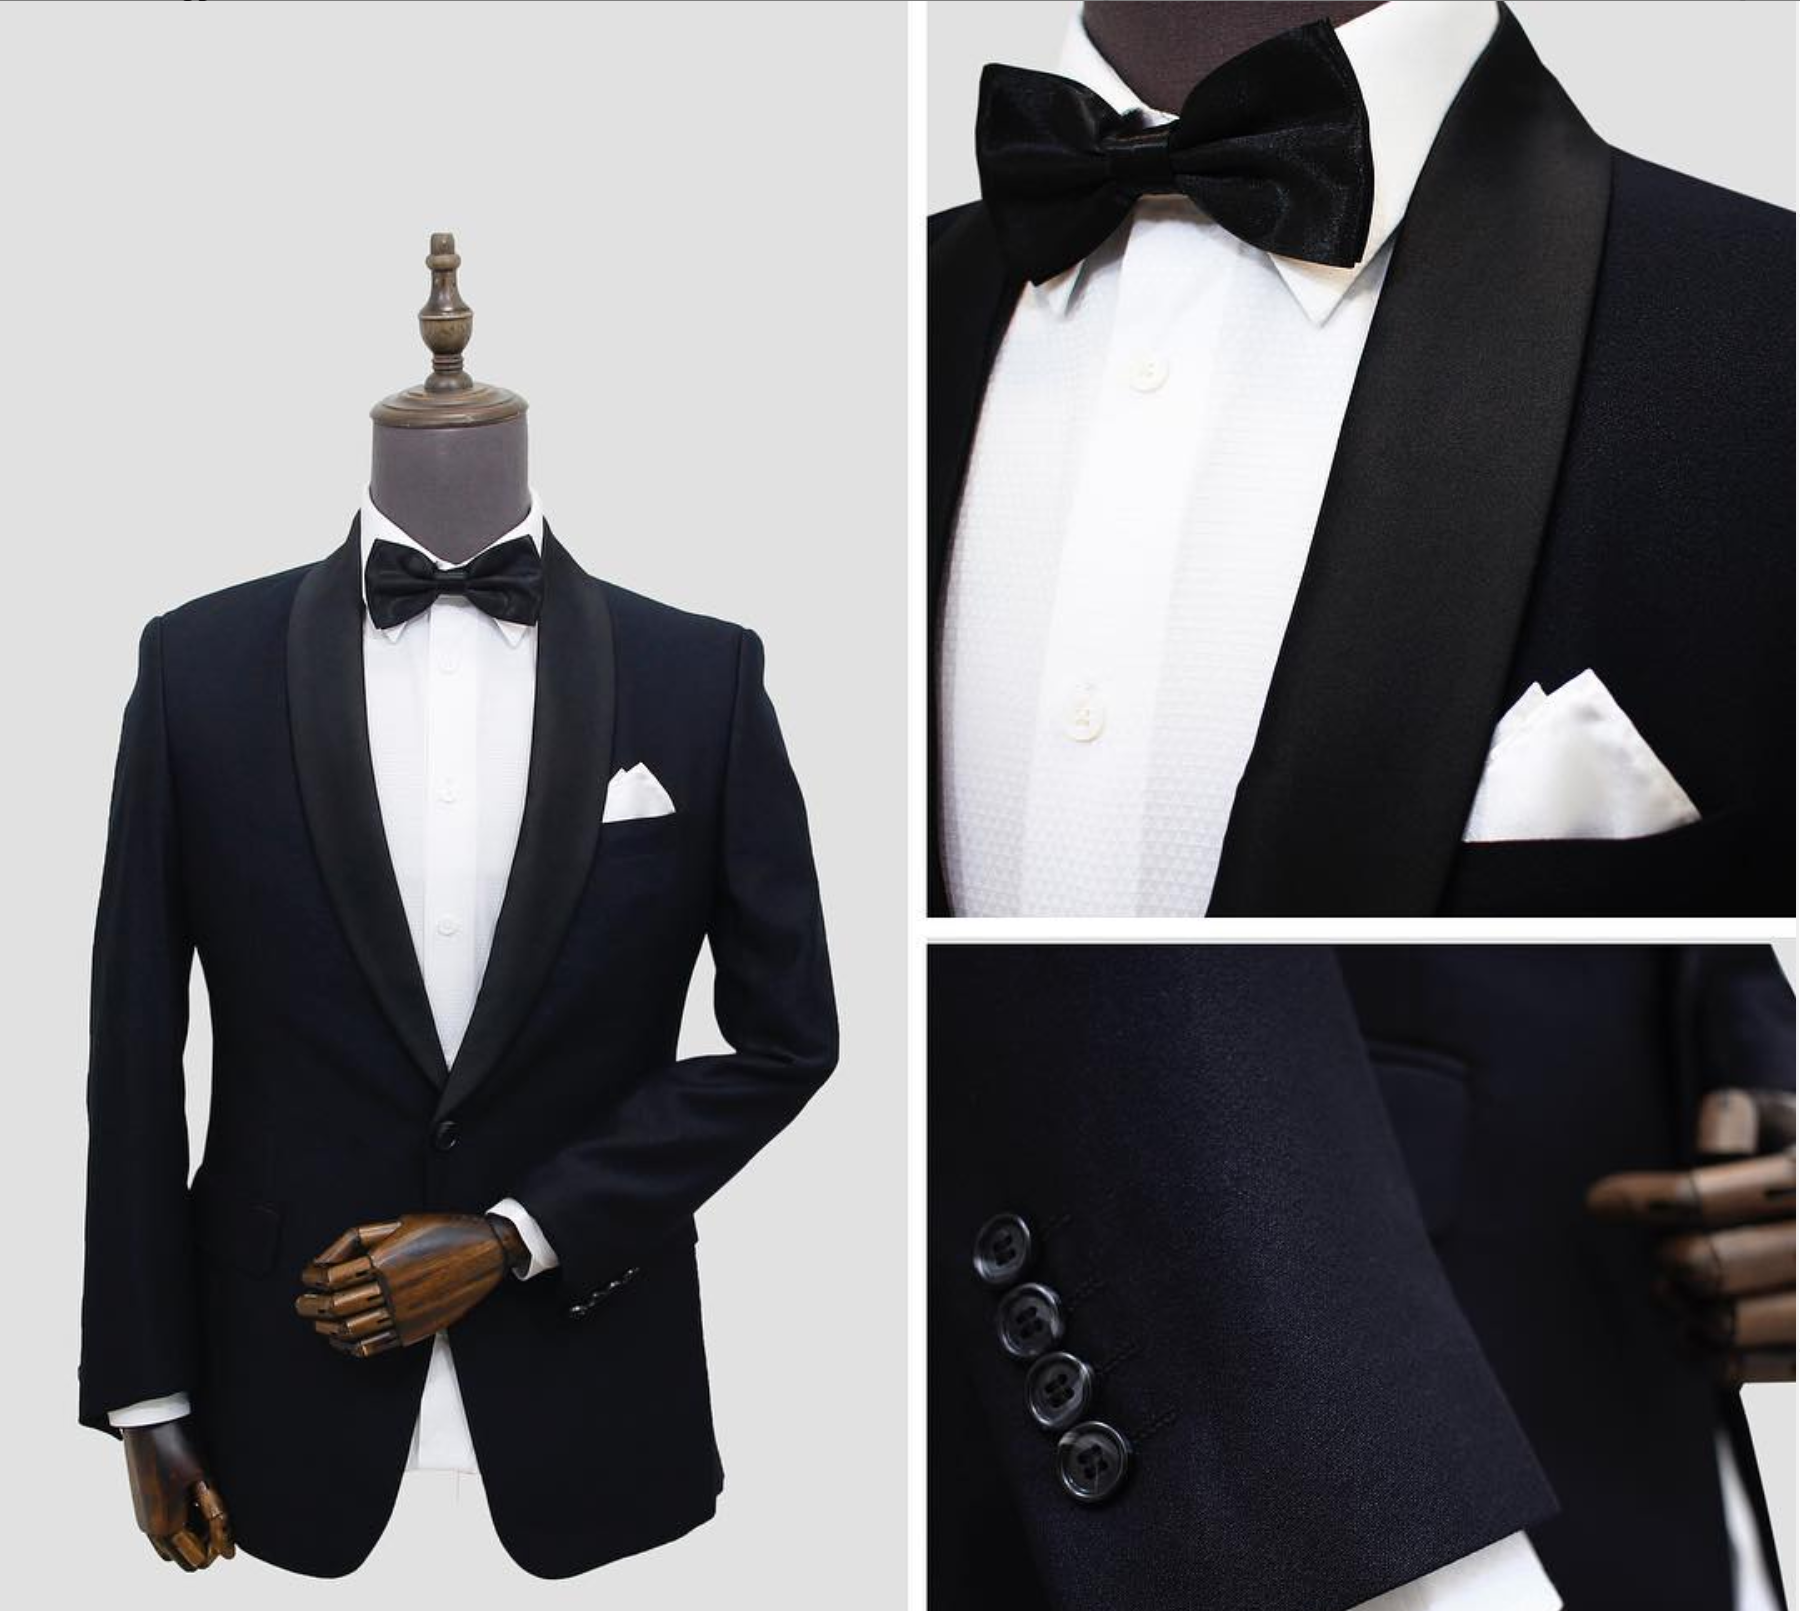 Tuxedo Vs Suit The Simple Differences Explained — Suityourself